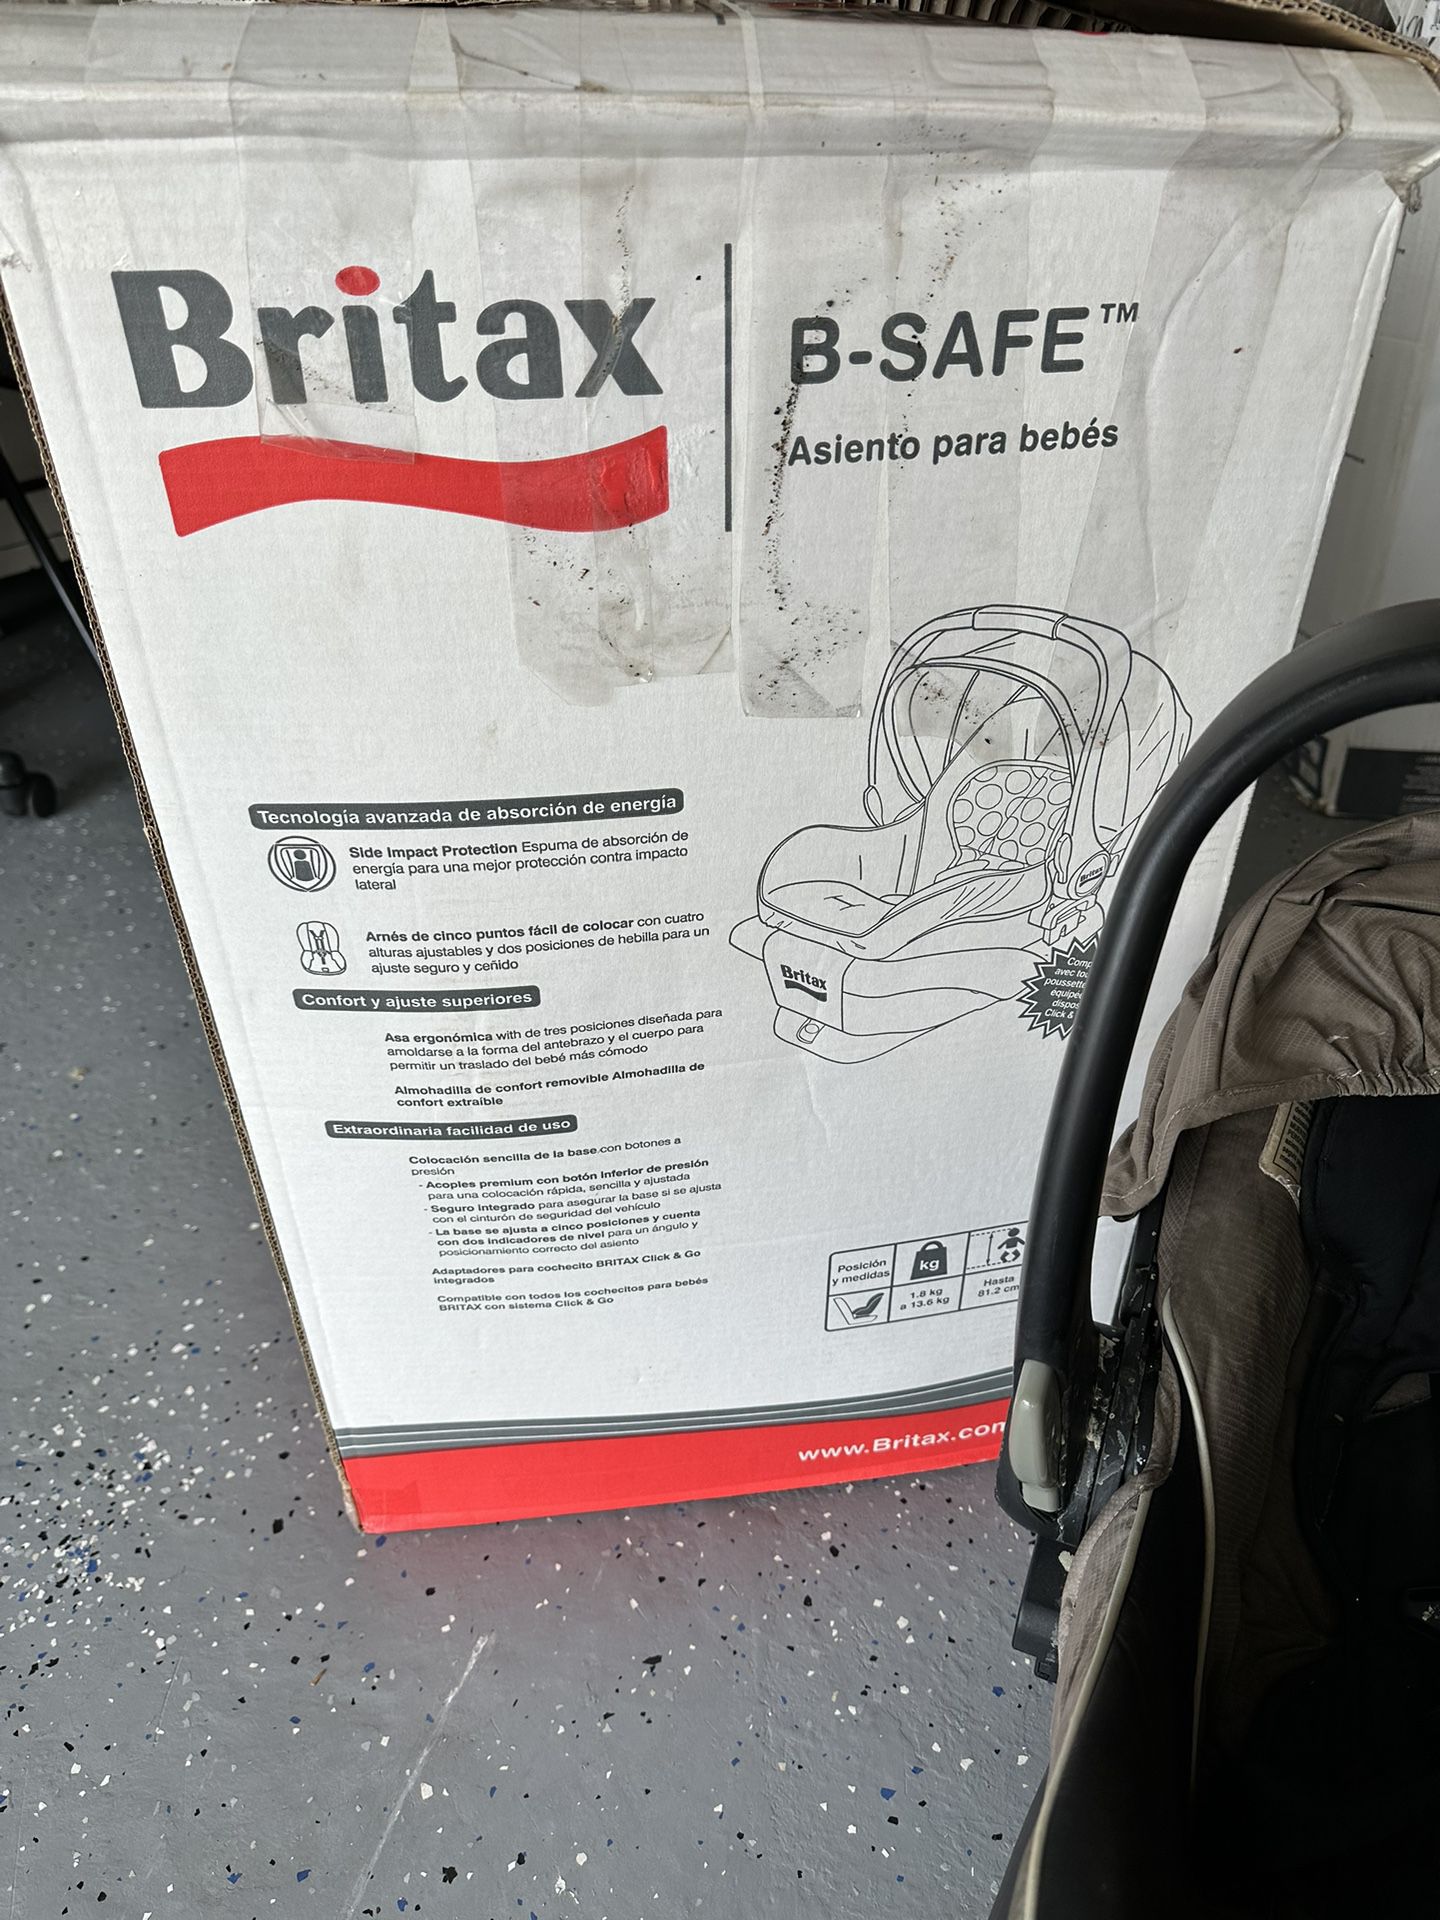 Britax Stroller And Car seat Mint Condition